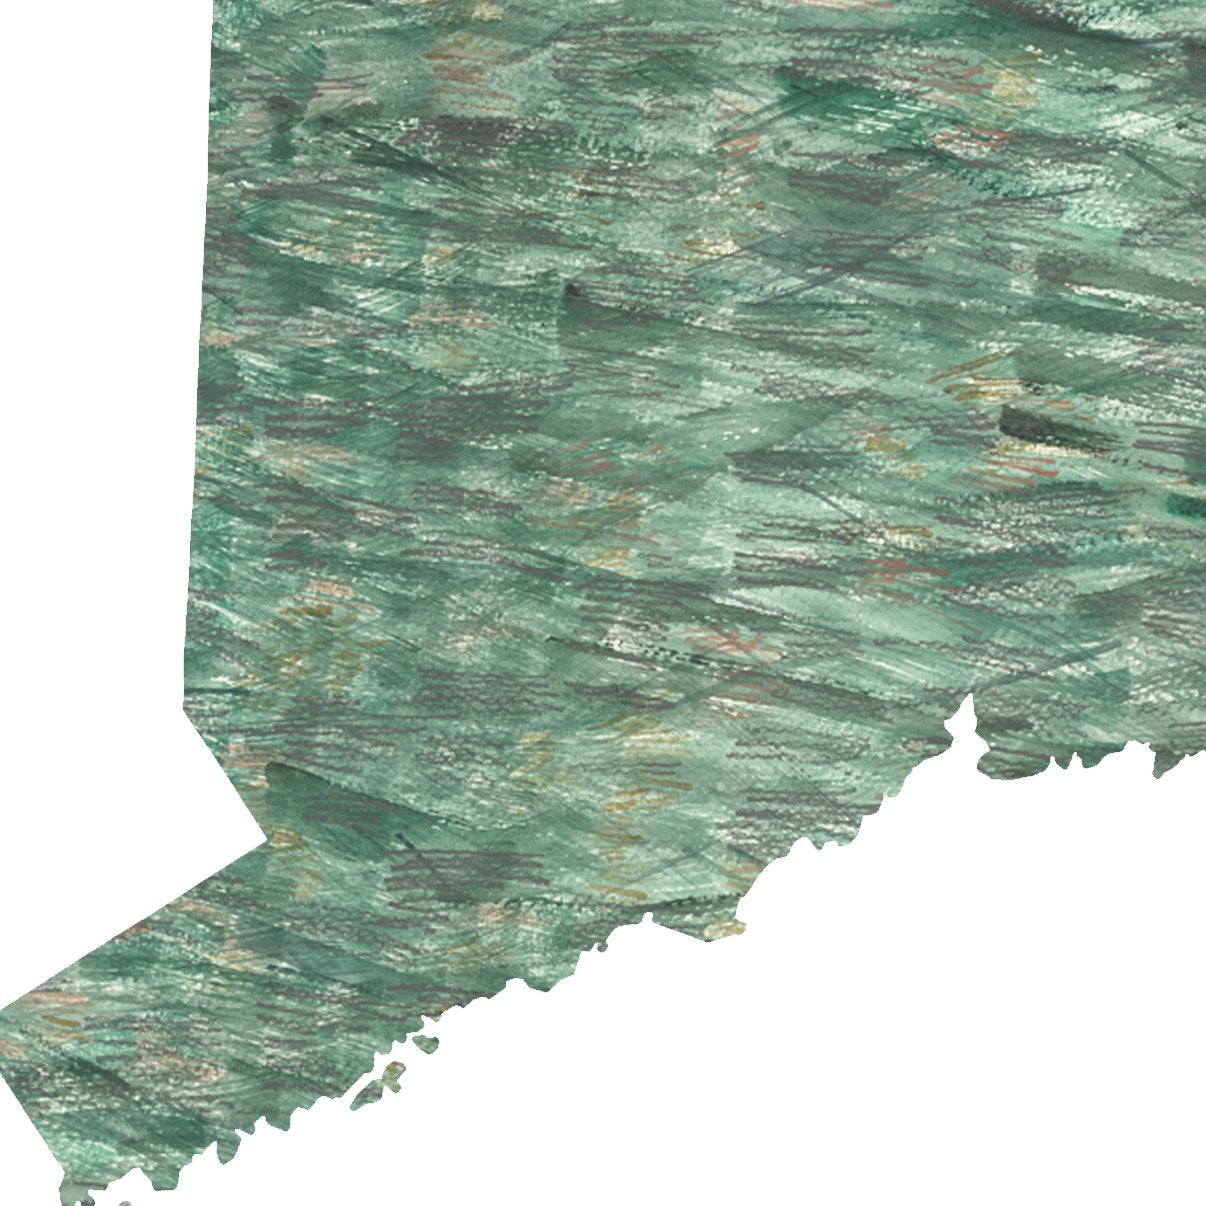 CONNECTICUT State Map: PRINT